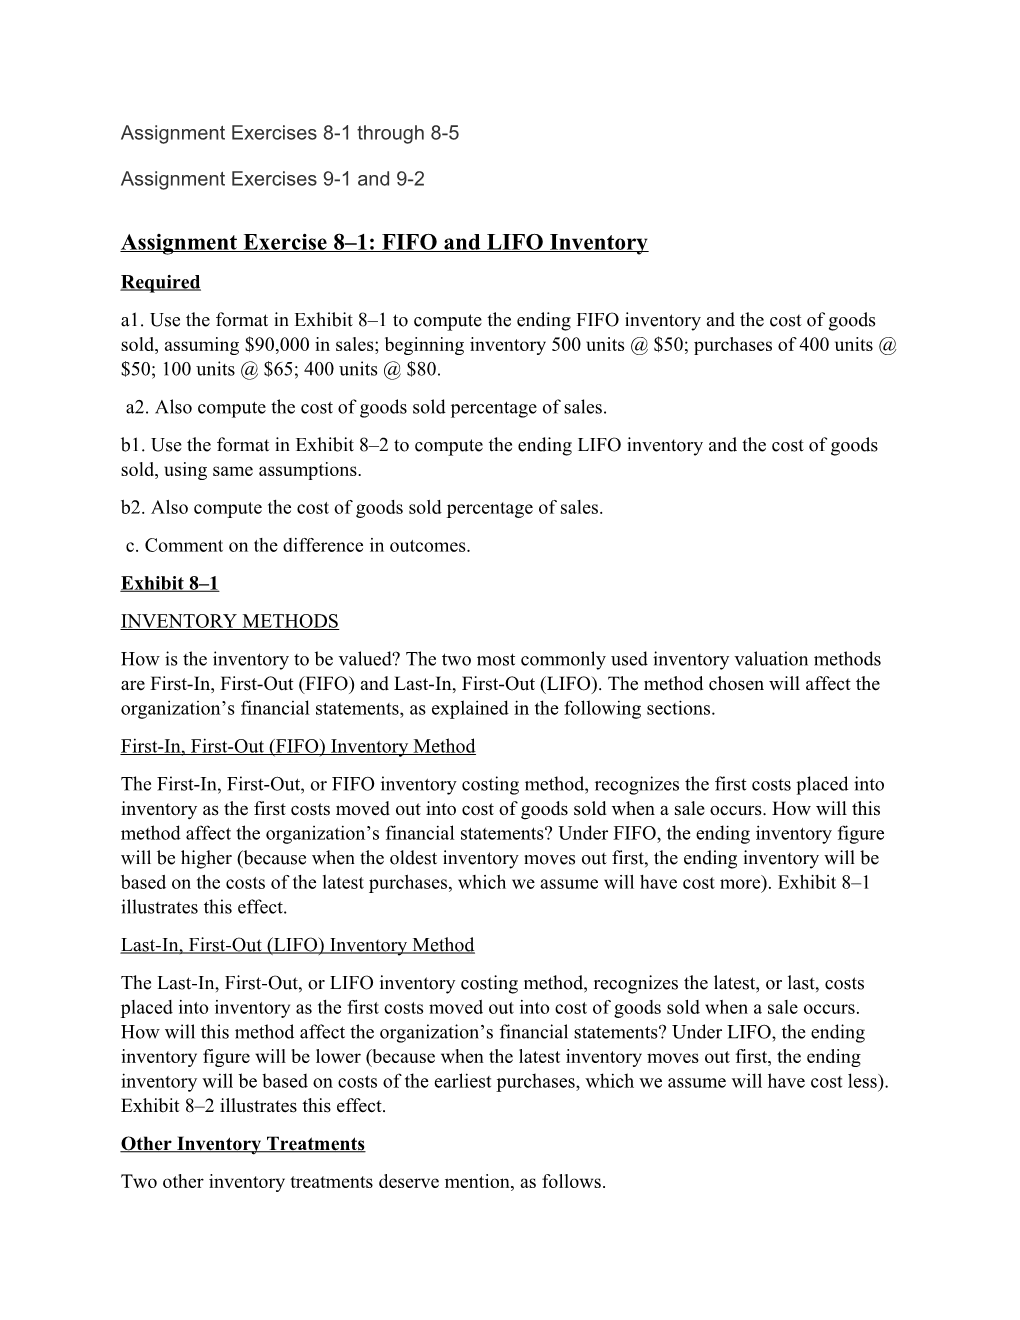 Assignment Exercise 8 1: FIFO and LIFO Inventory